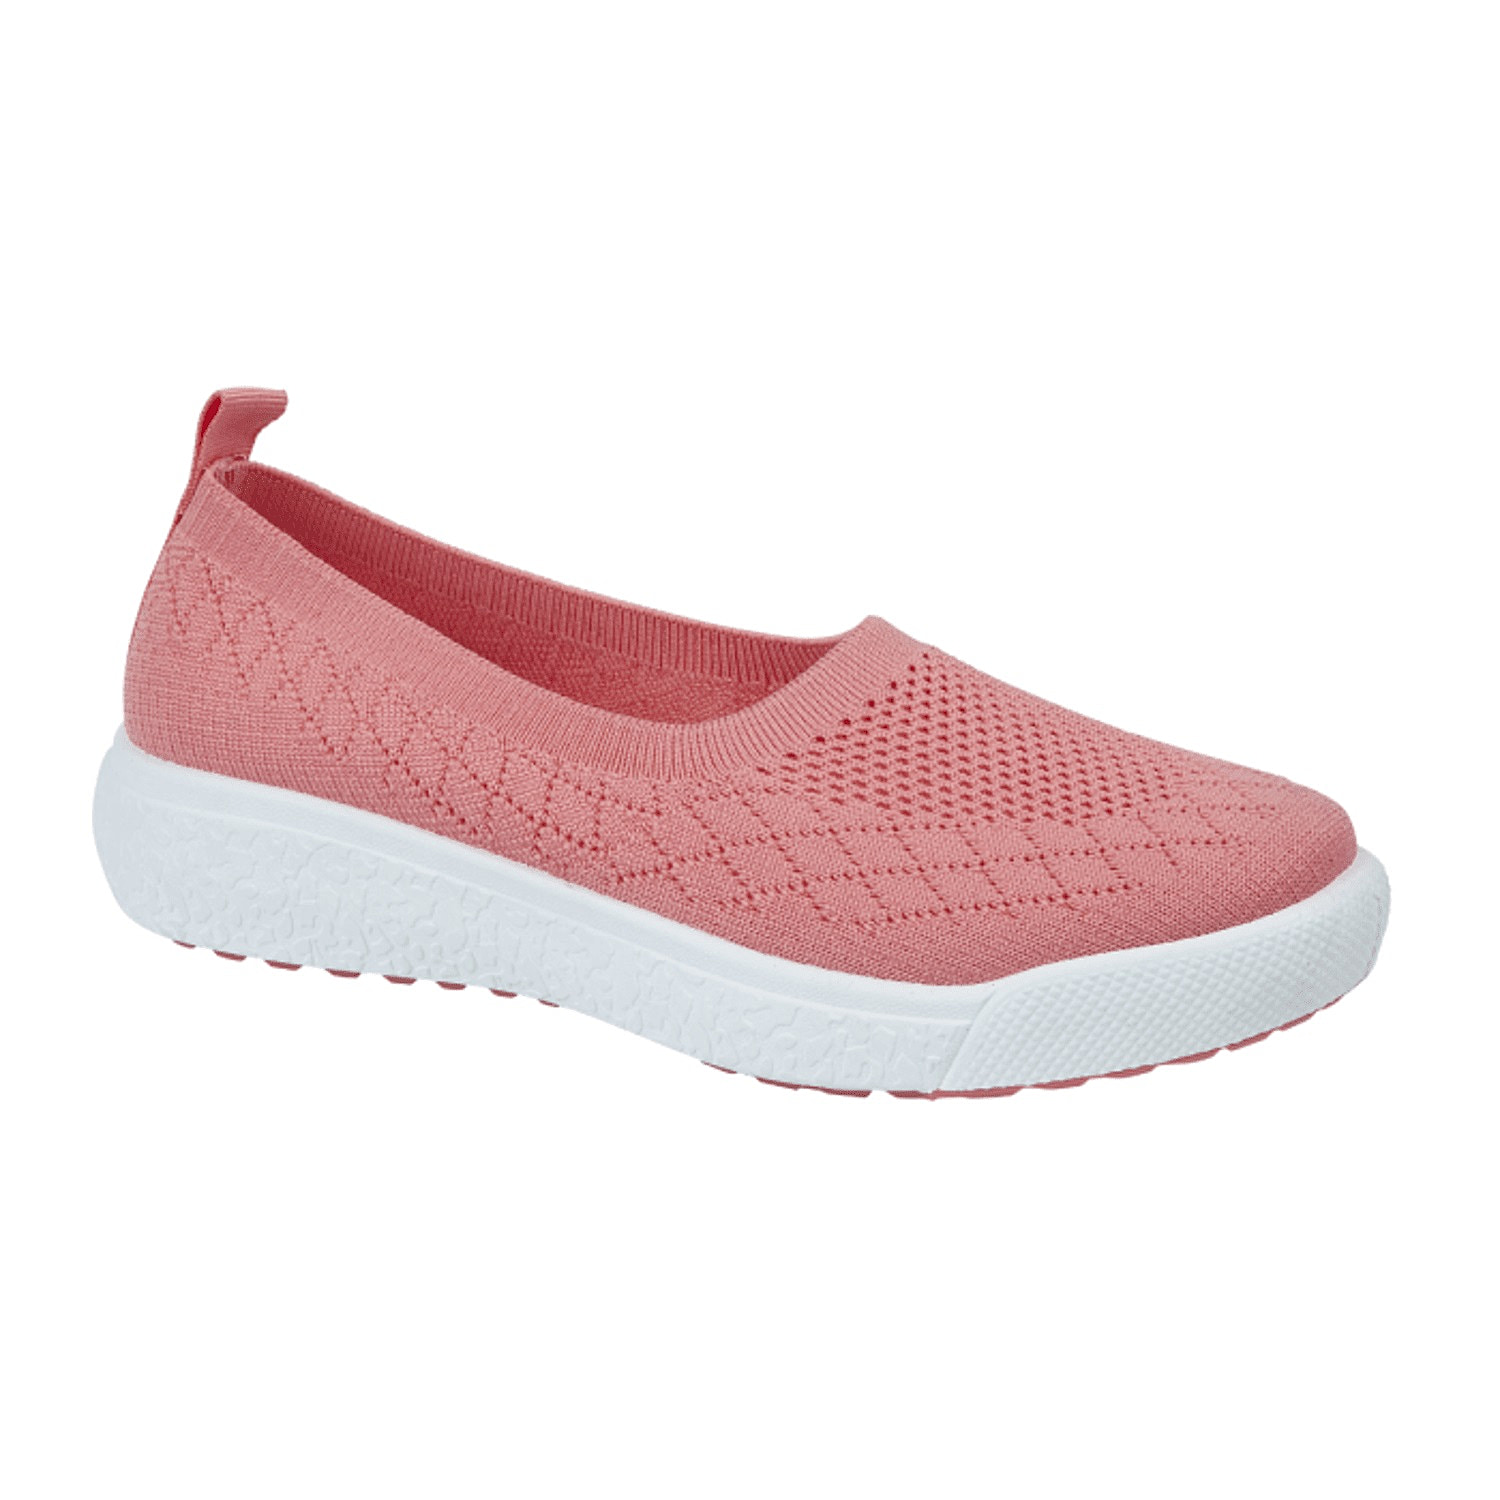 Brand New Launch - Elasticated Lytham Slip On Ballerina Pump (Size 4) - Coral